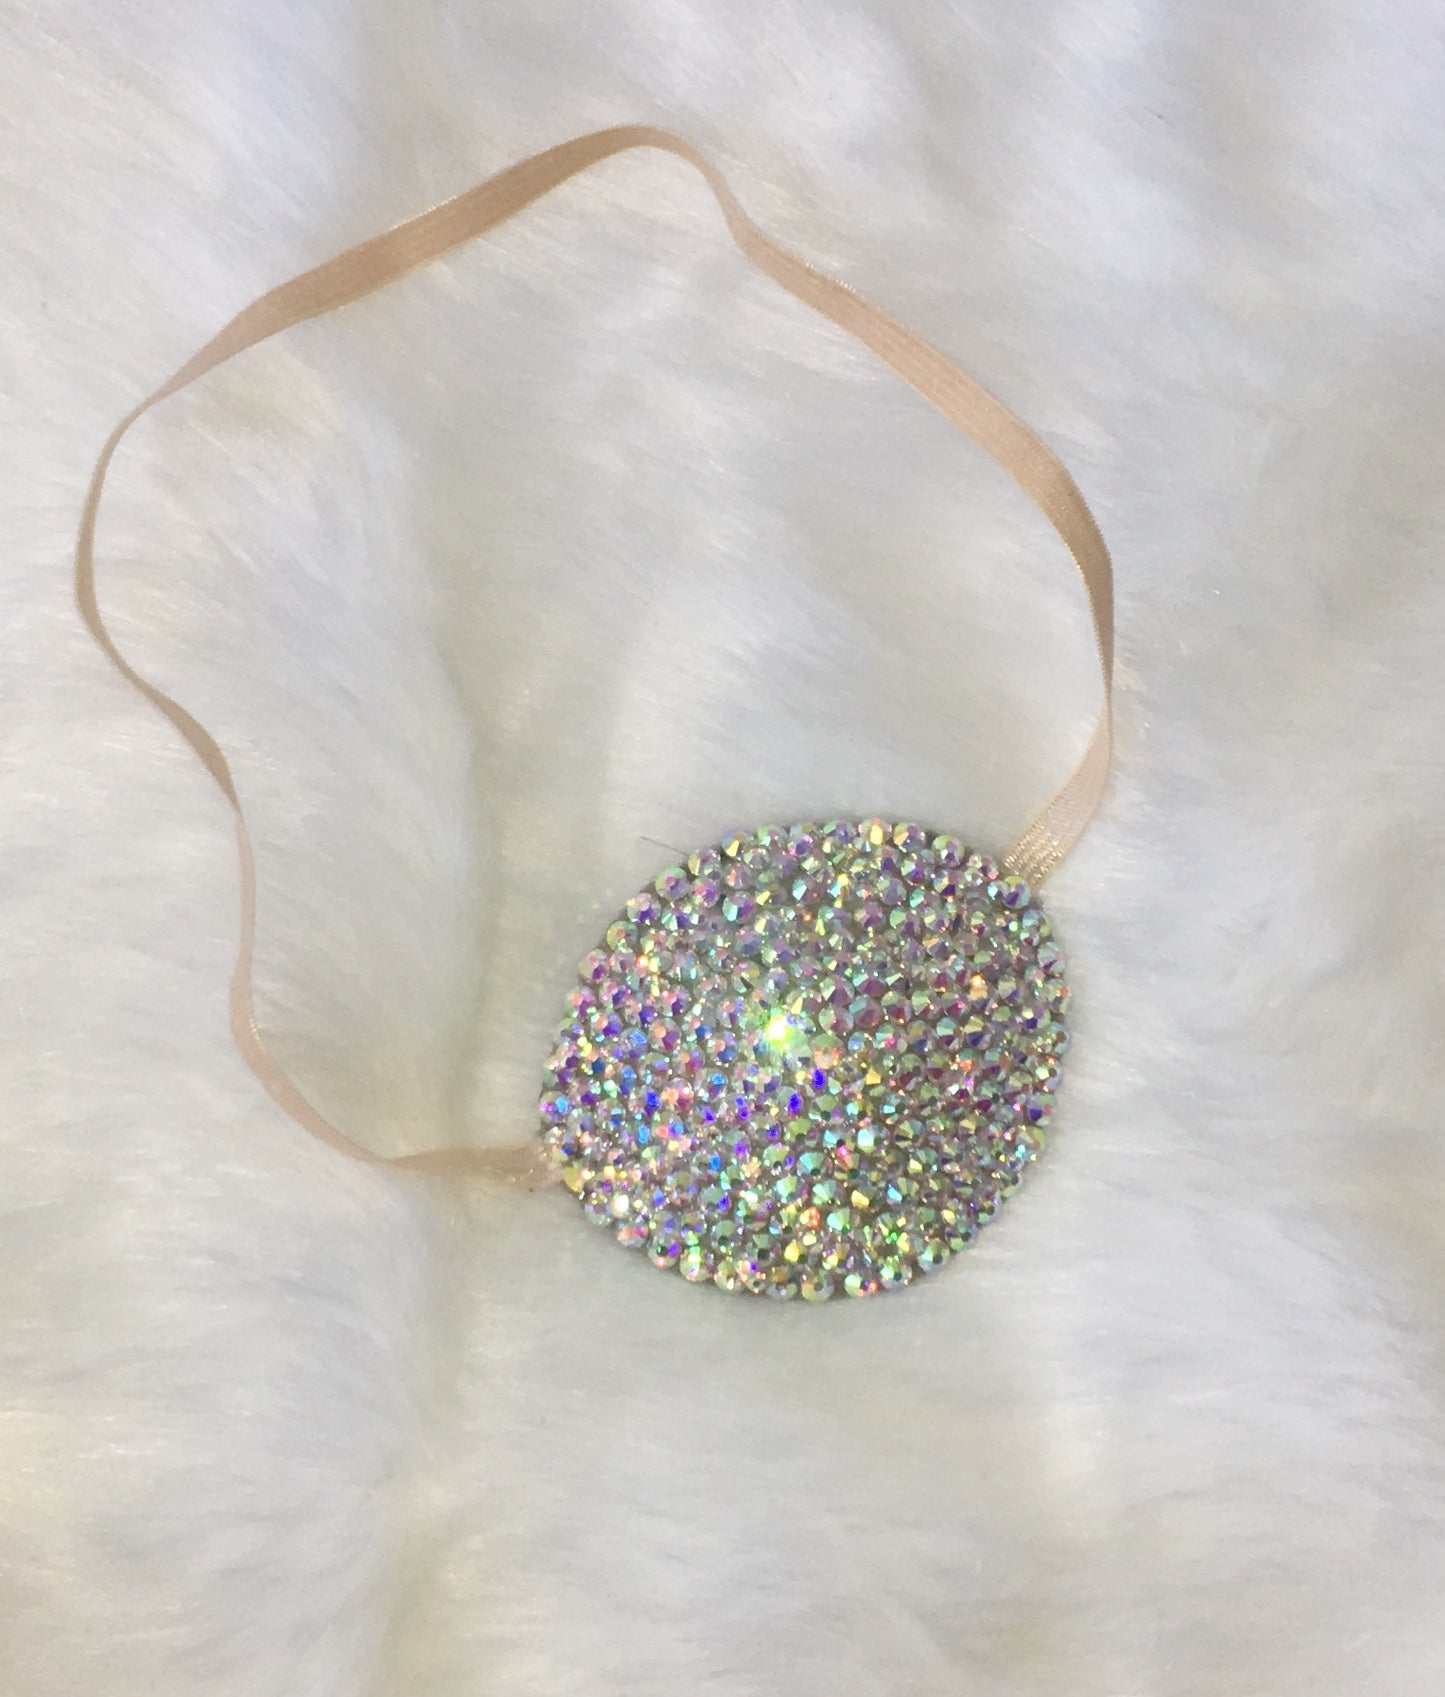 Custom Request Any Colour Nude/Skintone Bedazzled Eye Patch